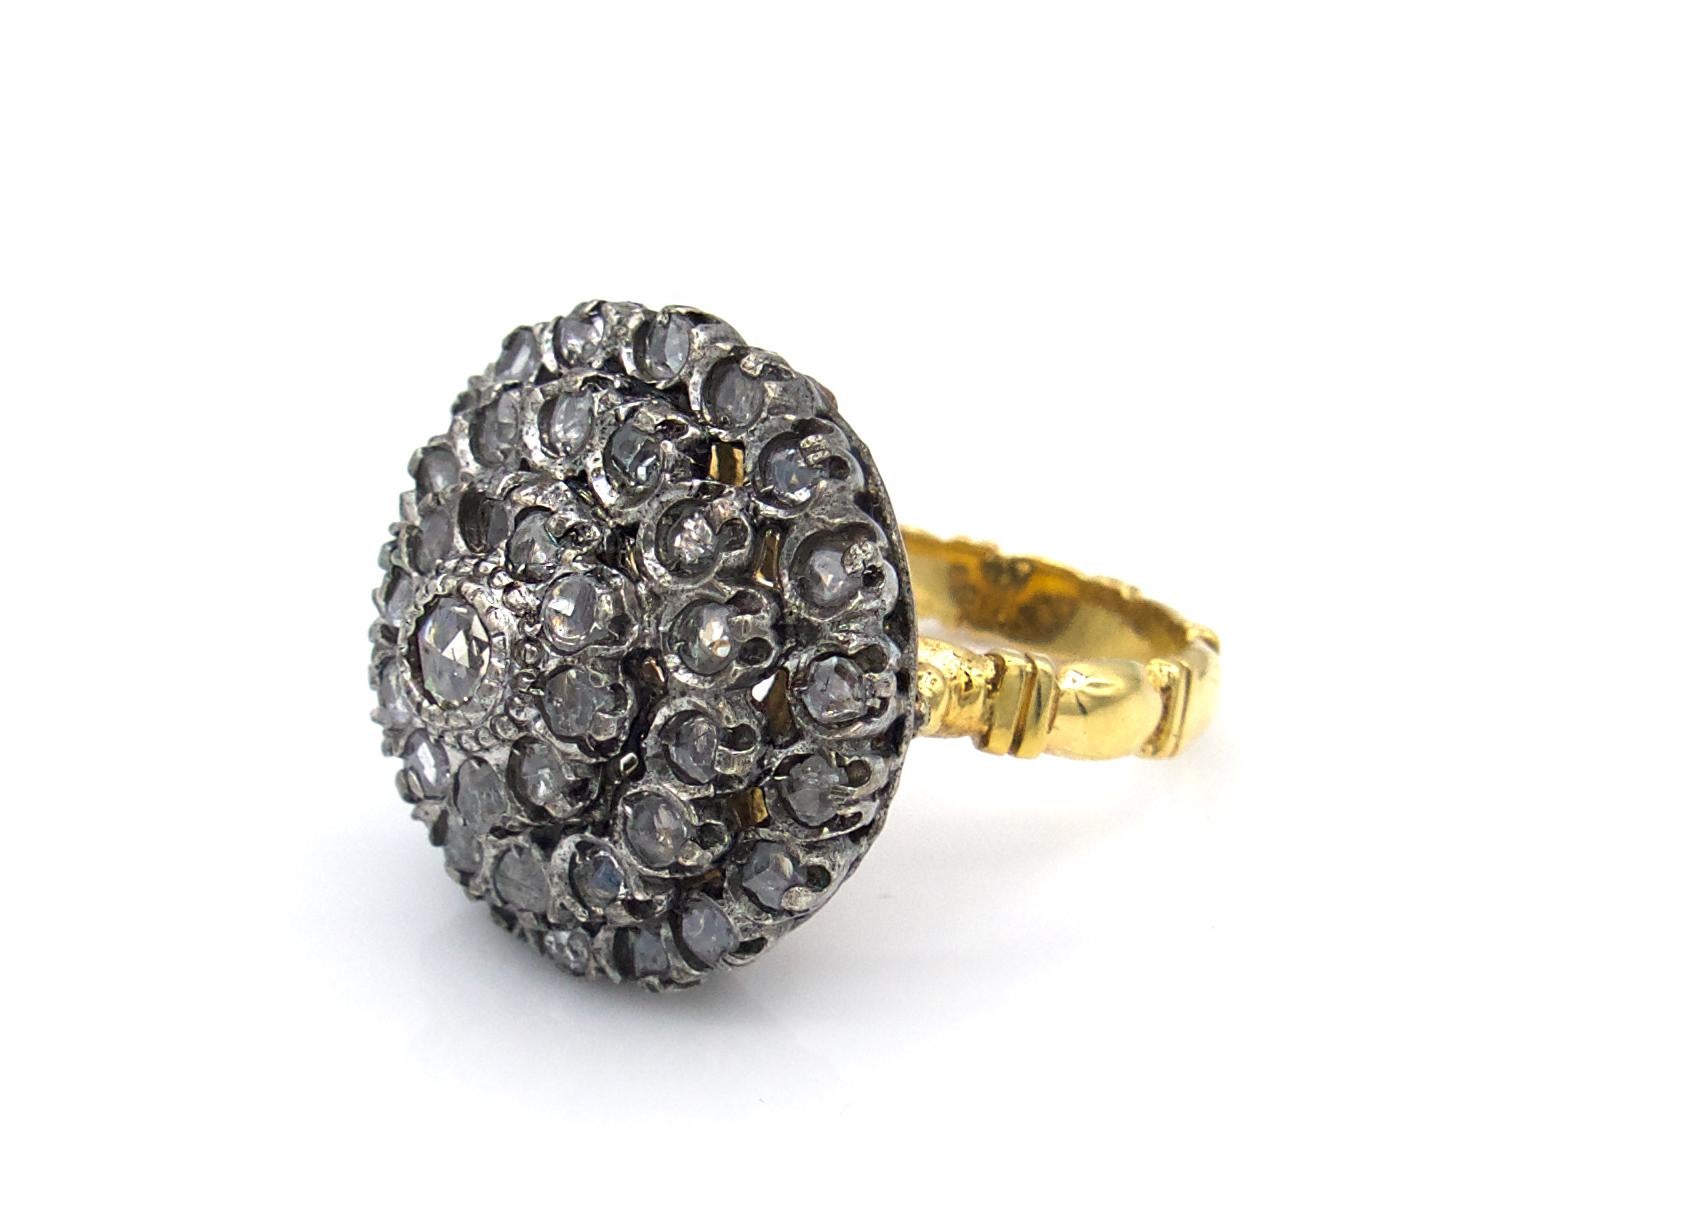 This turn-of-the-century diamond dome ring is set with 43 rose-cut diamonds. The 18 Karat yellow gold band and under carriage have intricate filigree detail work. This piece, like many from the era, also has a sterling silver topping for a two-toned